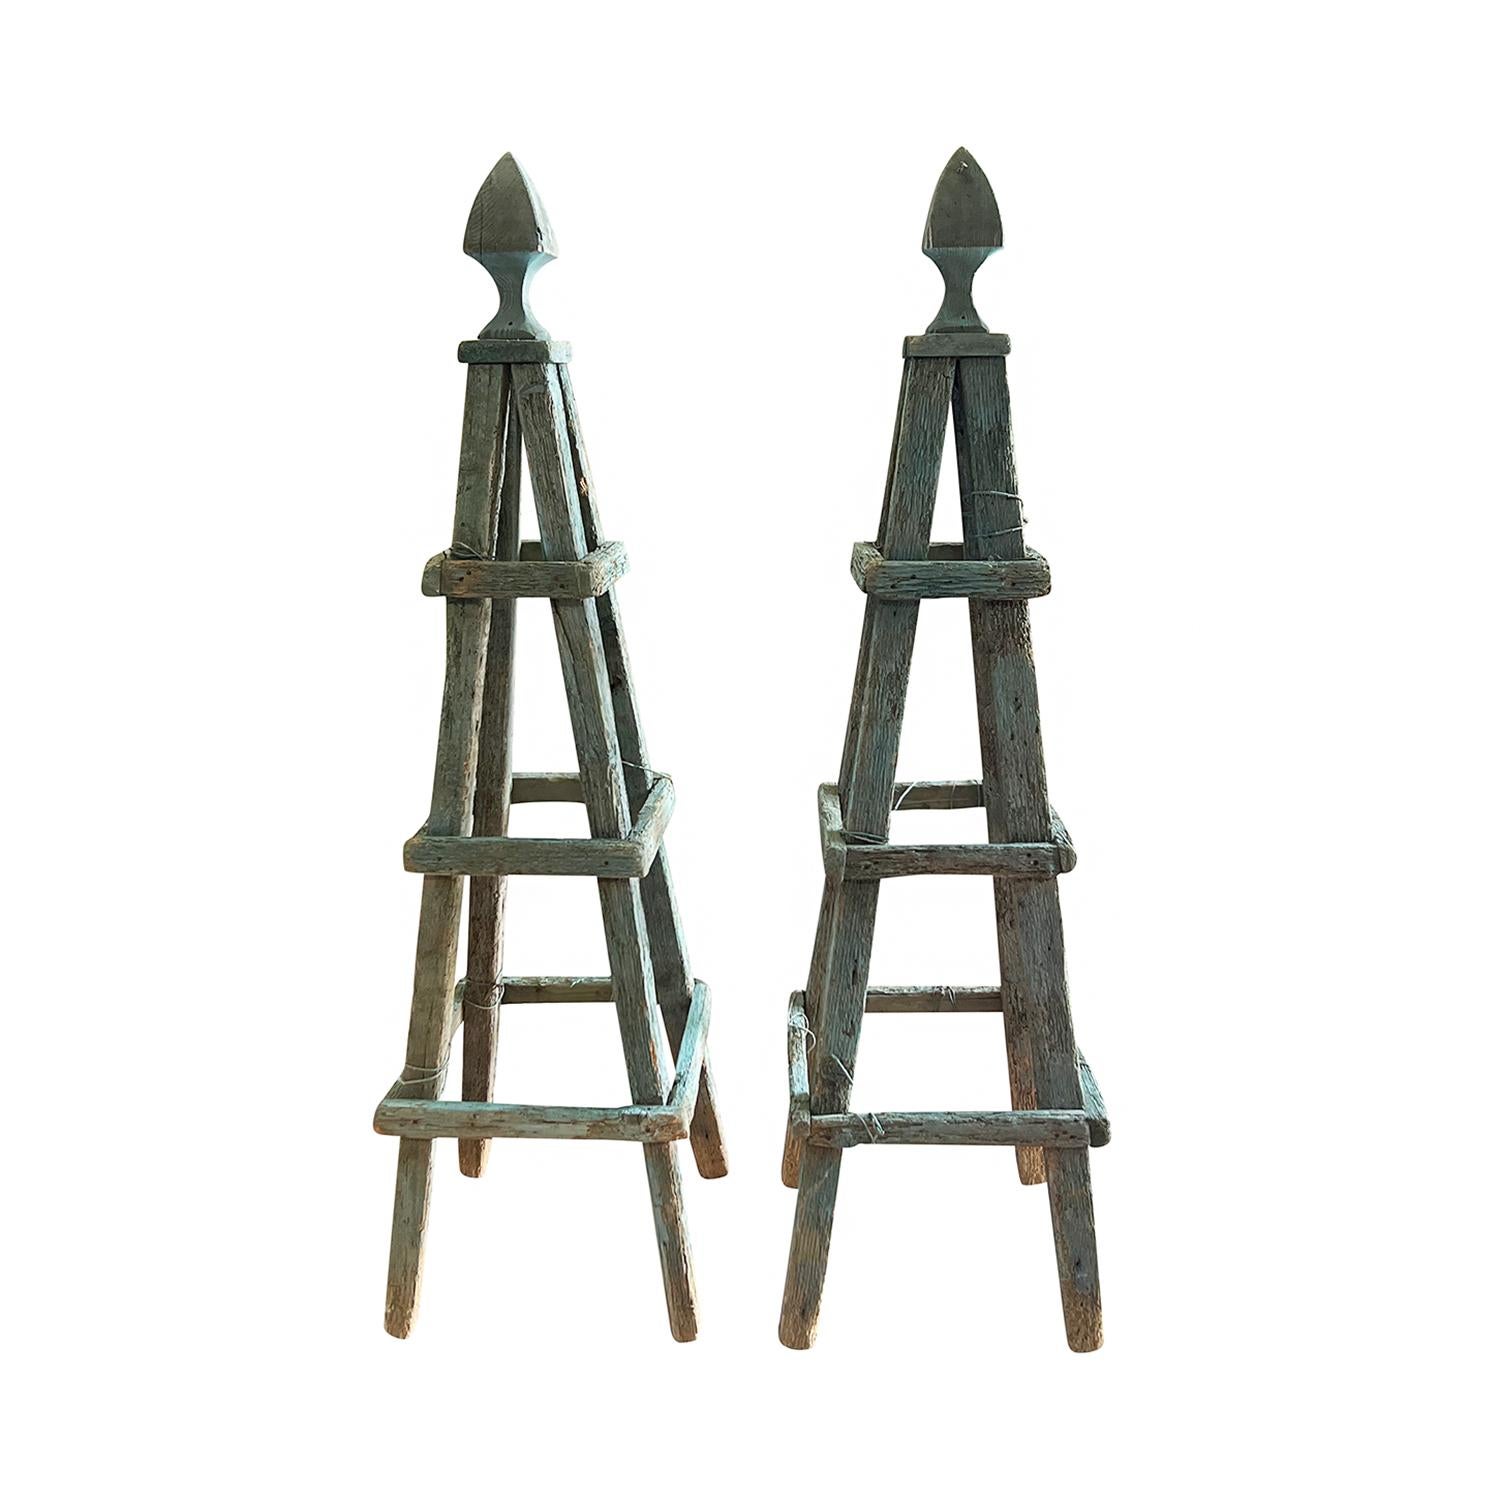 An antique pair of tall treillis obelisks in Versailles green topped by pointed finials, in good condition. These antique hand crafted painted Pinewood obelisks have multiple layers of old paint and therefore have a lot of character and presence. A